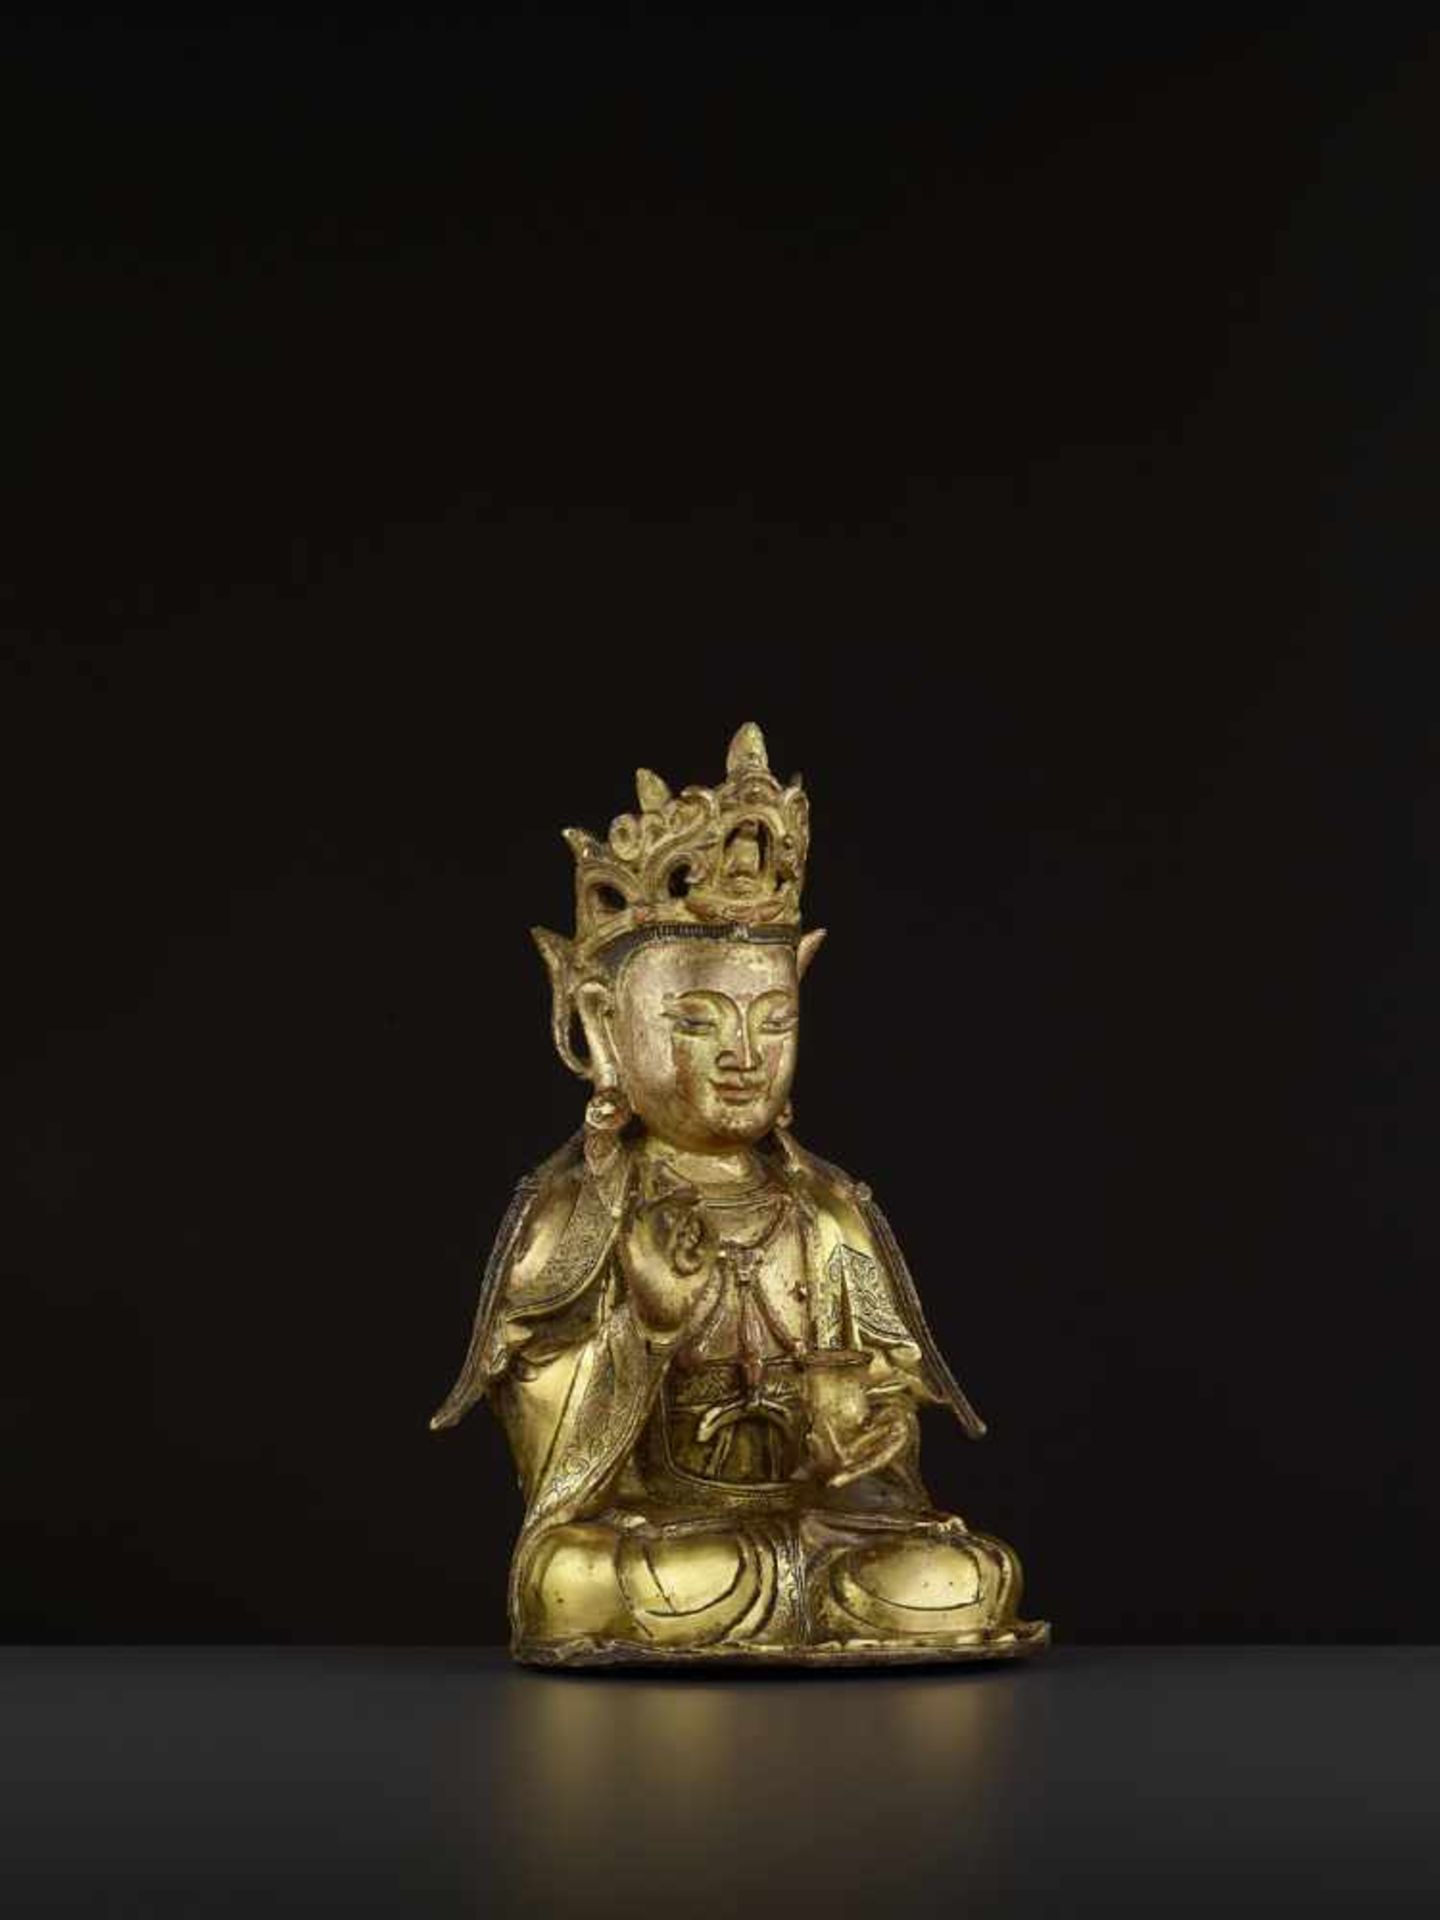 A FINELY CAST GILT-BRONZE FIGURE OF GUANYIN, MING DYNASTY China, 16th-17th century. The figure is - Image 8 of 10